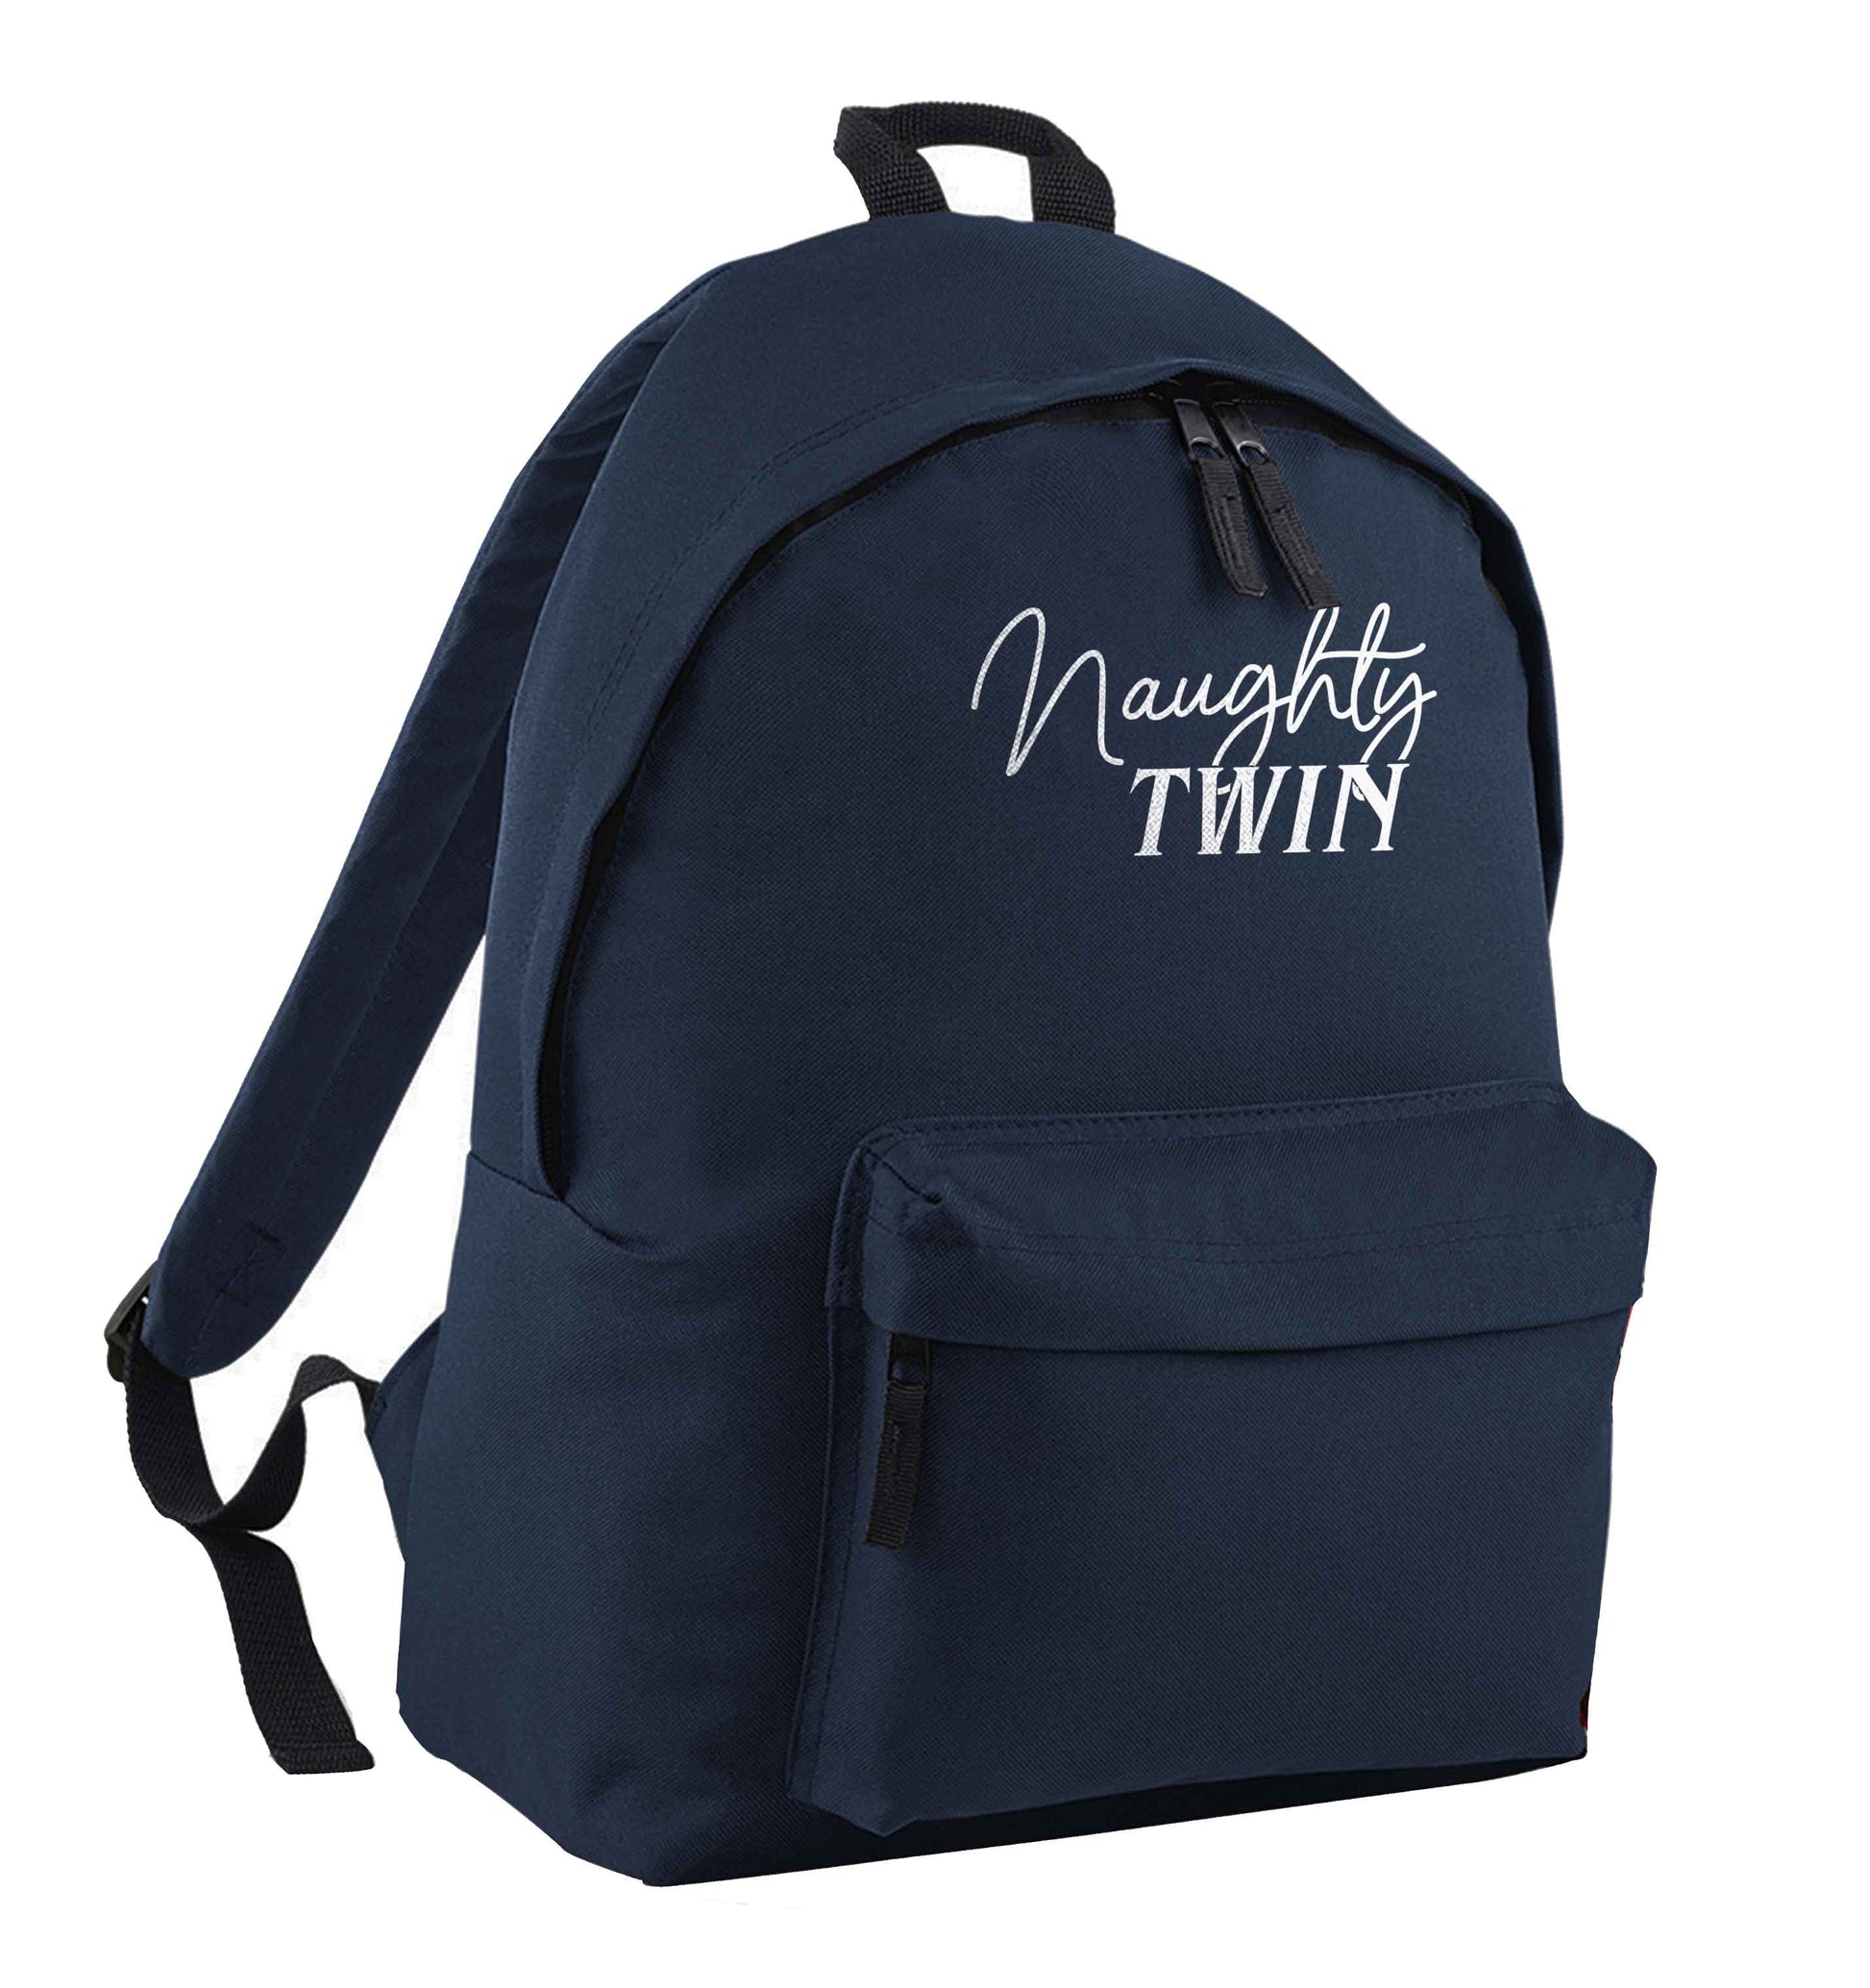 Naughty twin navy adults backpack